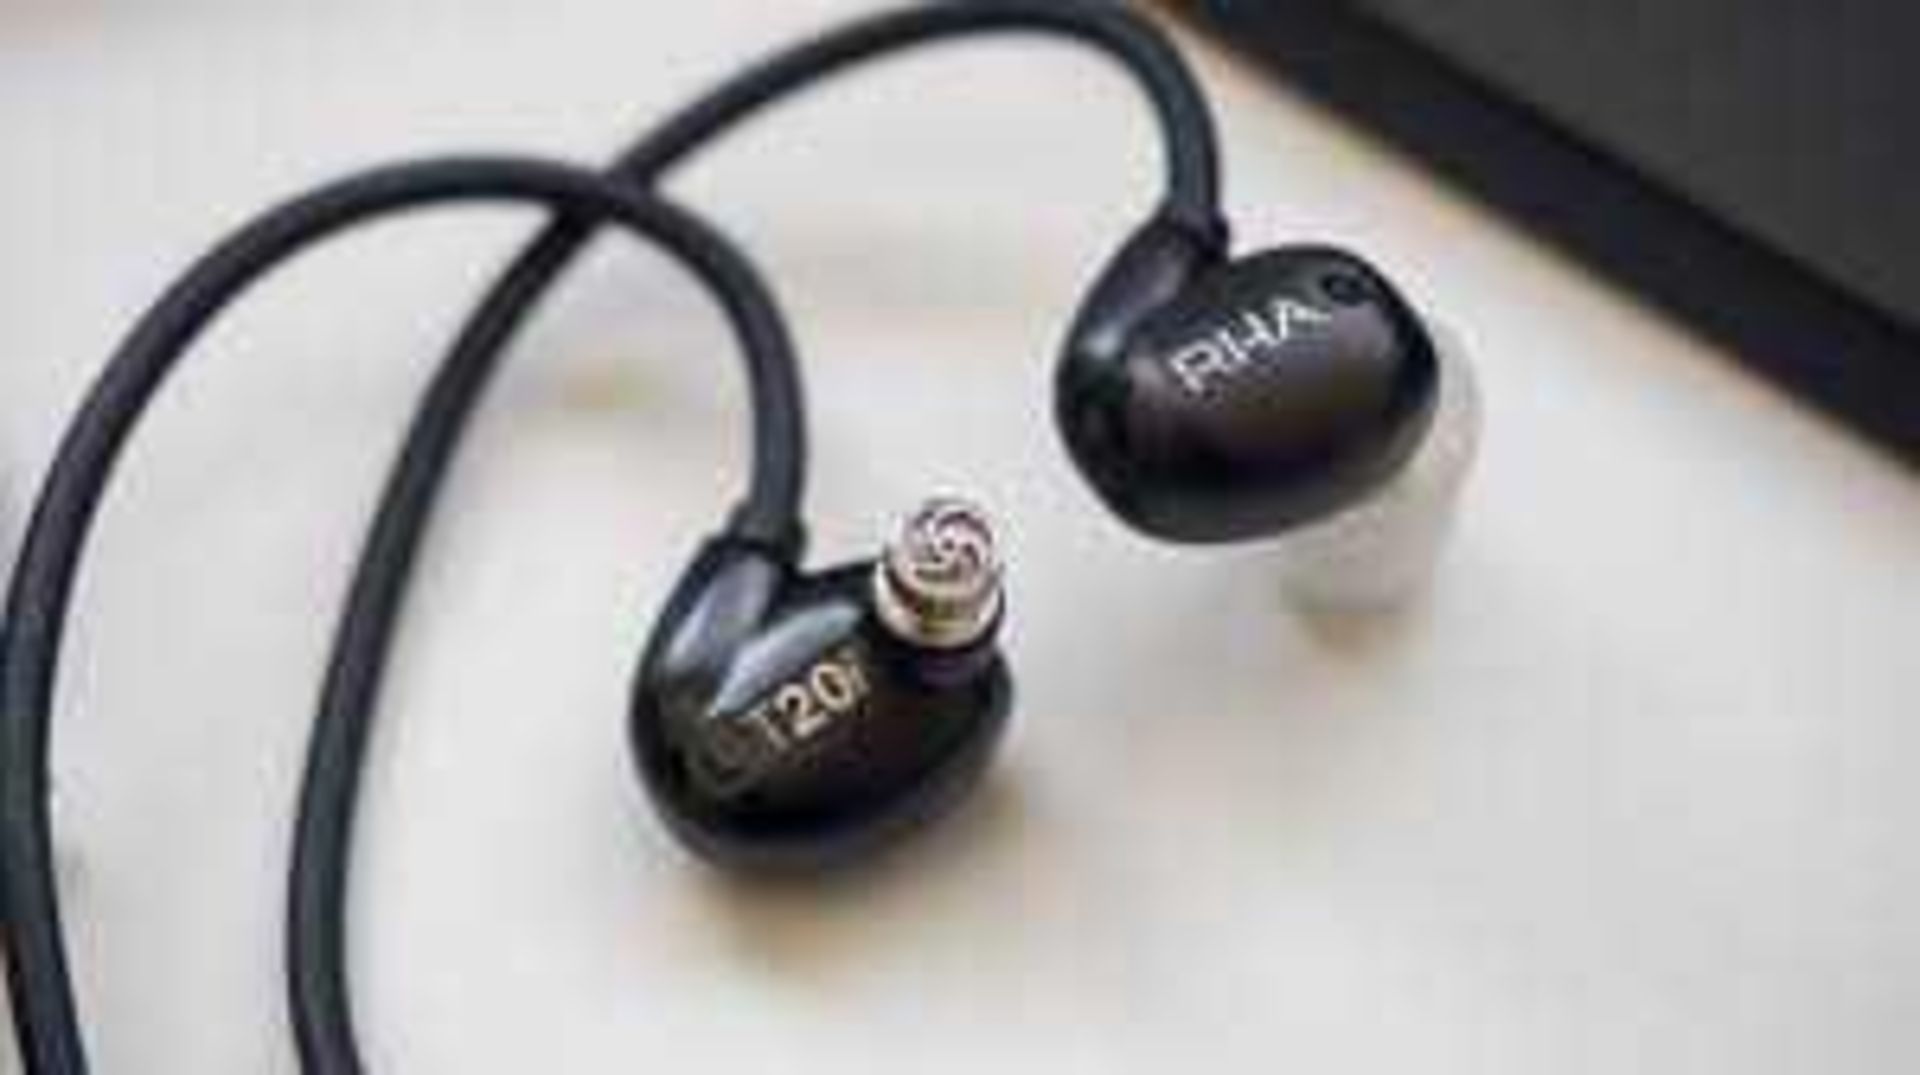 RRP £180 Boxed Rha T20I Wireless In-Ear Headphones Tested And Working